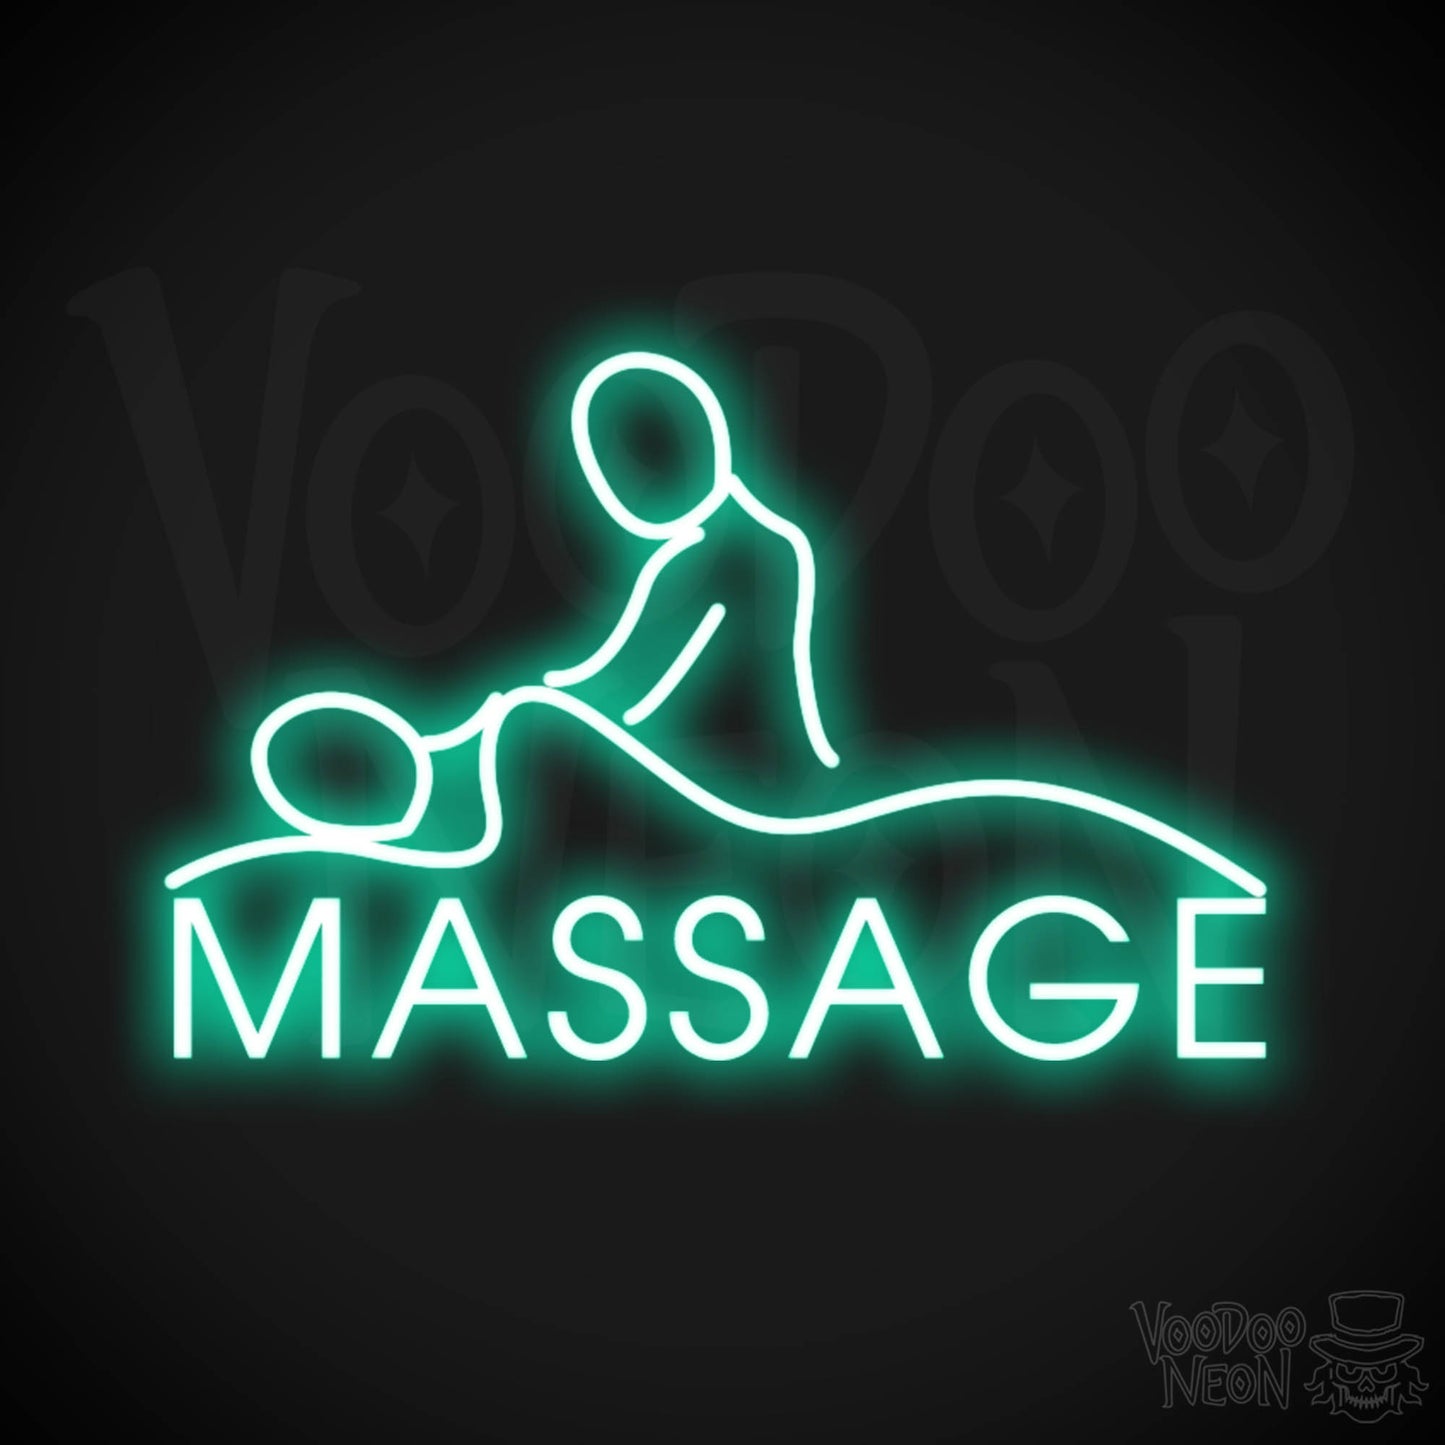 Massage Neon Sign - Neon Massage Sign - Massage Light Up Sign - Color Light Green